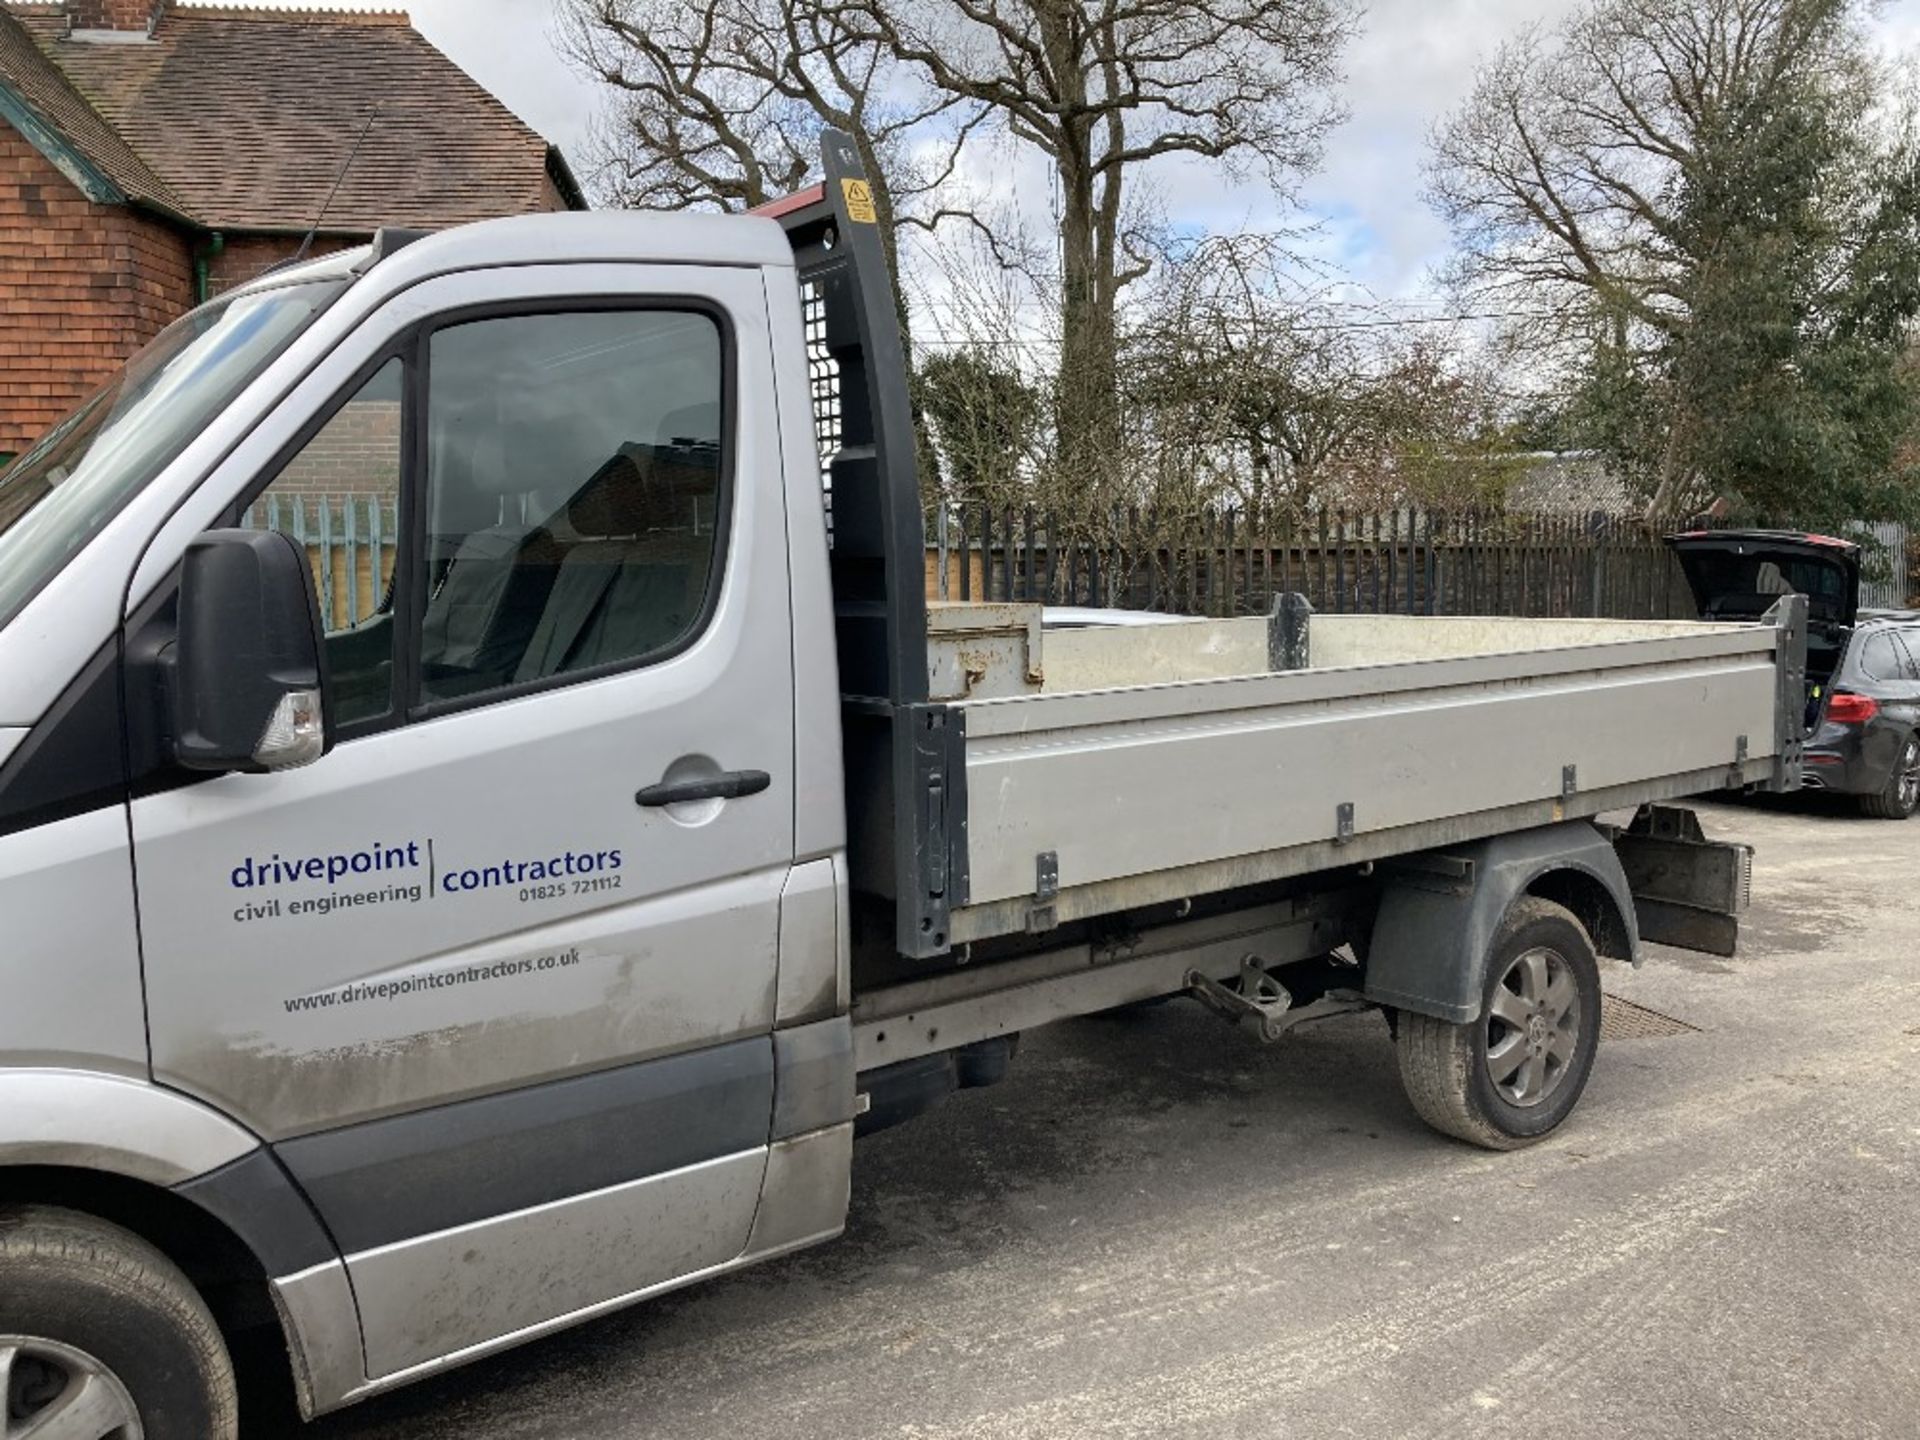 2017 Volkswagen Crafter CR35 TDI Bmt Dropside Tipper - Image 4 of 19